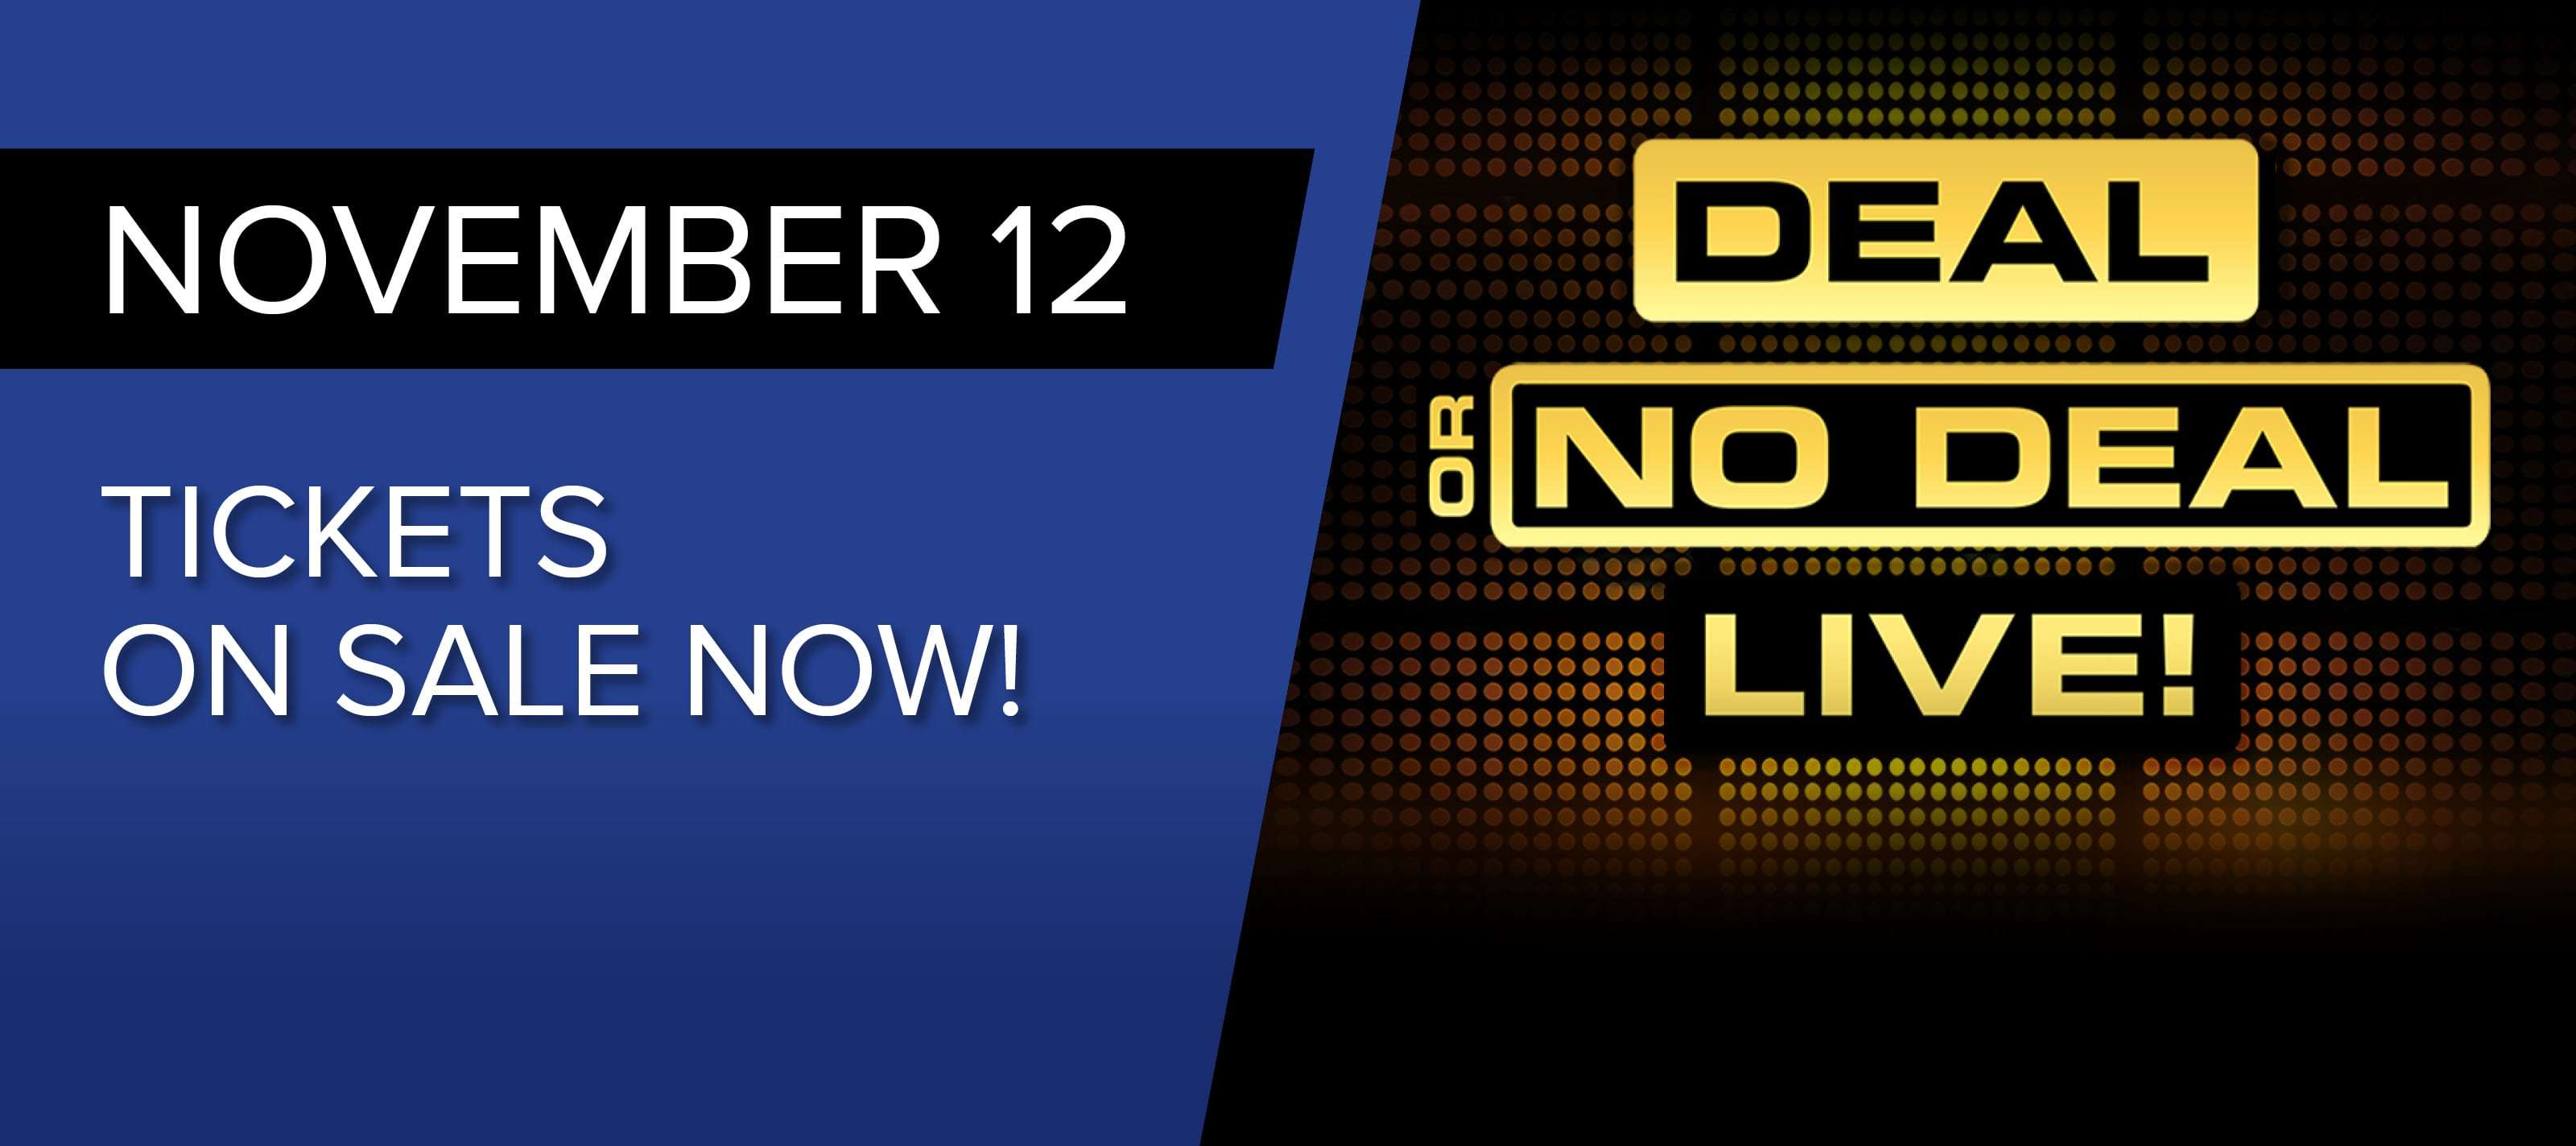 Novemeber 12 - Tickets on sale Now - Deal or no deal live